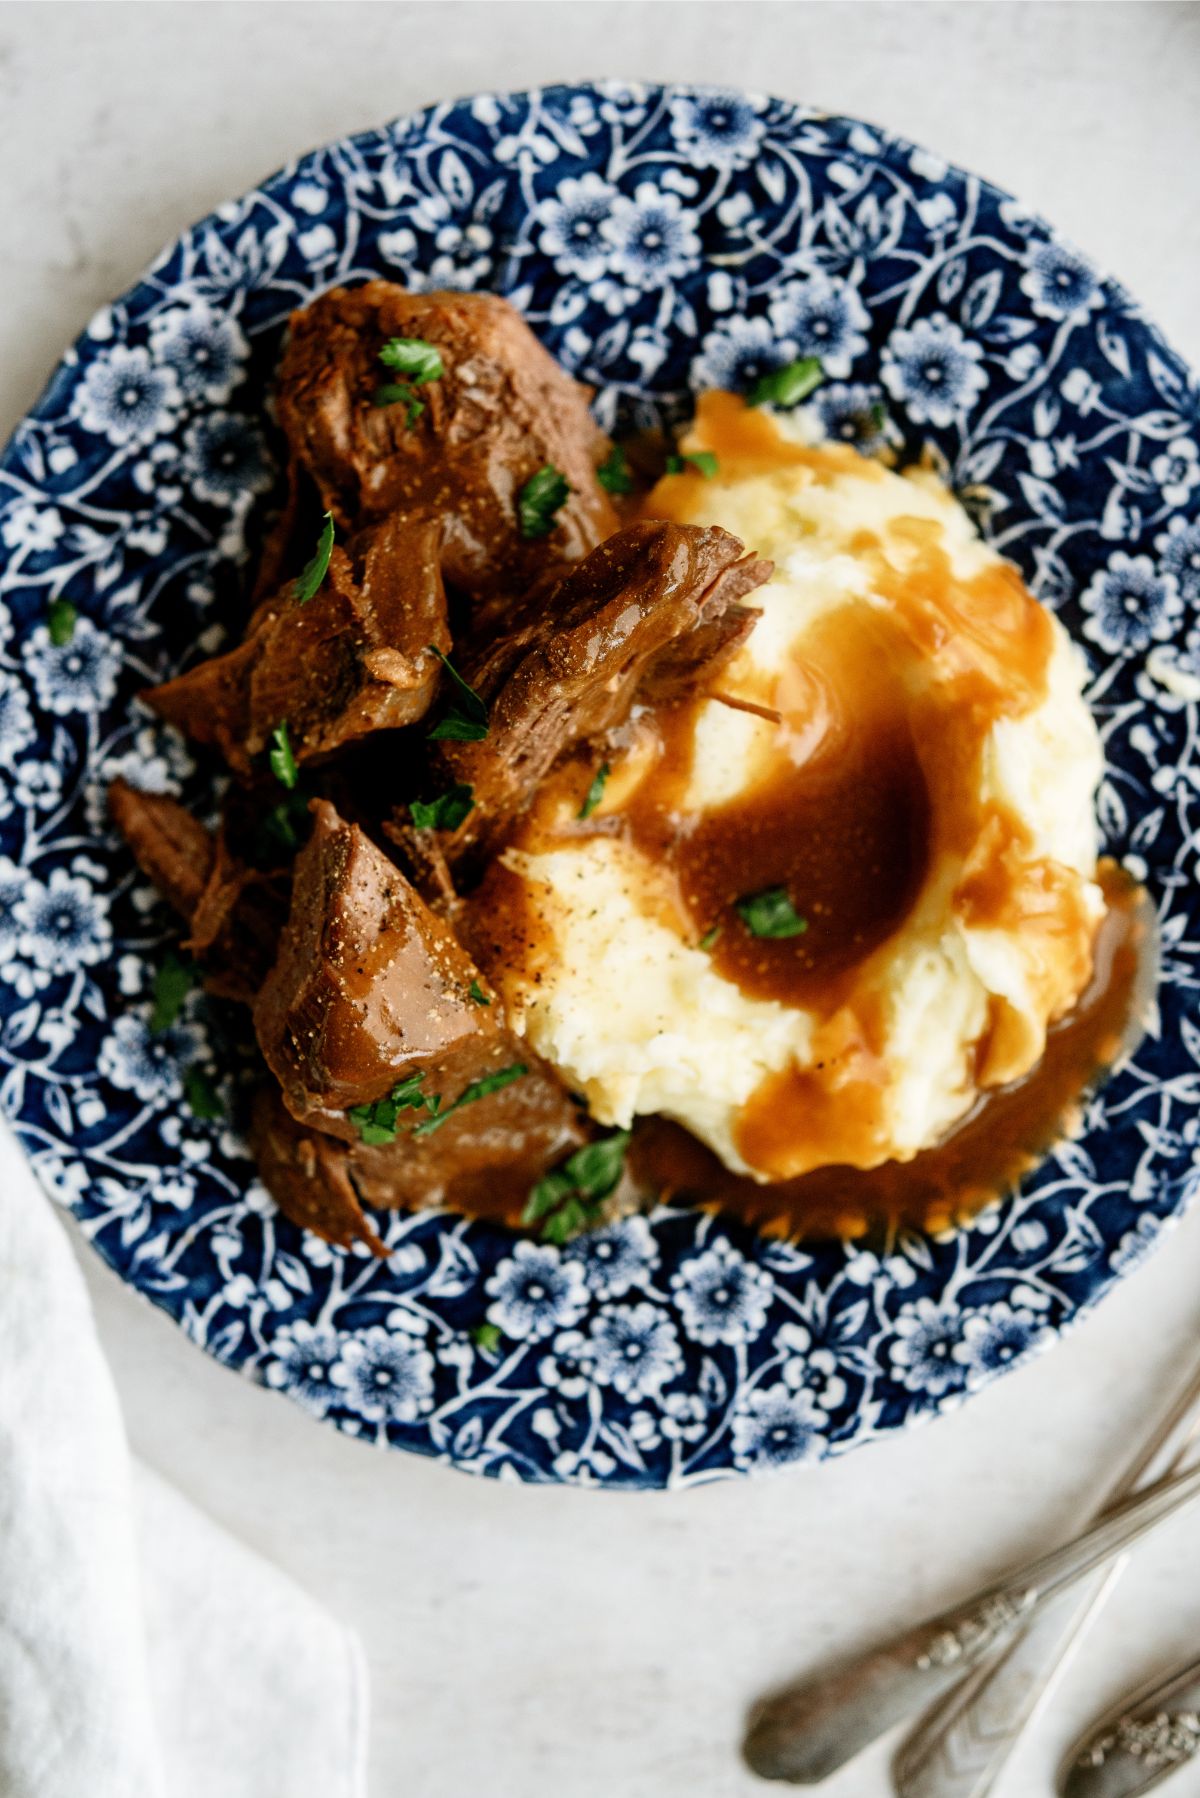 Top view of Instant Pot Texas Roadhouse Pot Roast and mashed potatoes with gravy on a plate